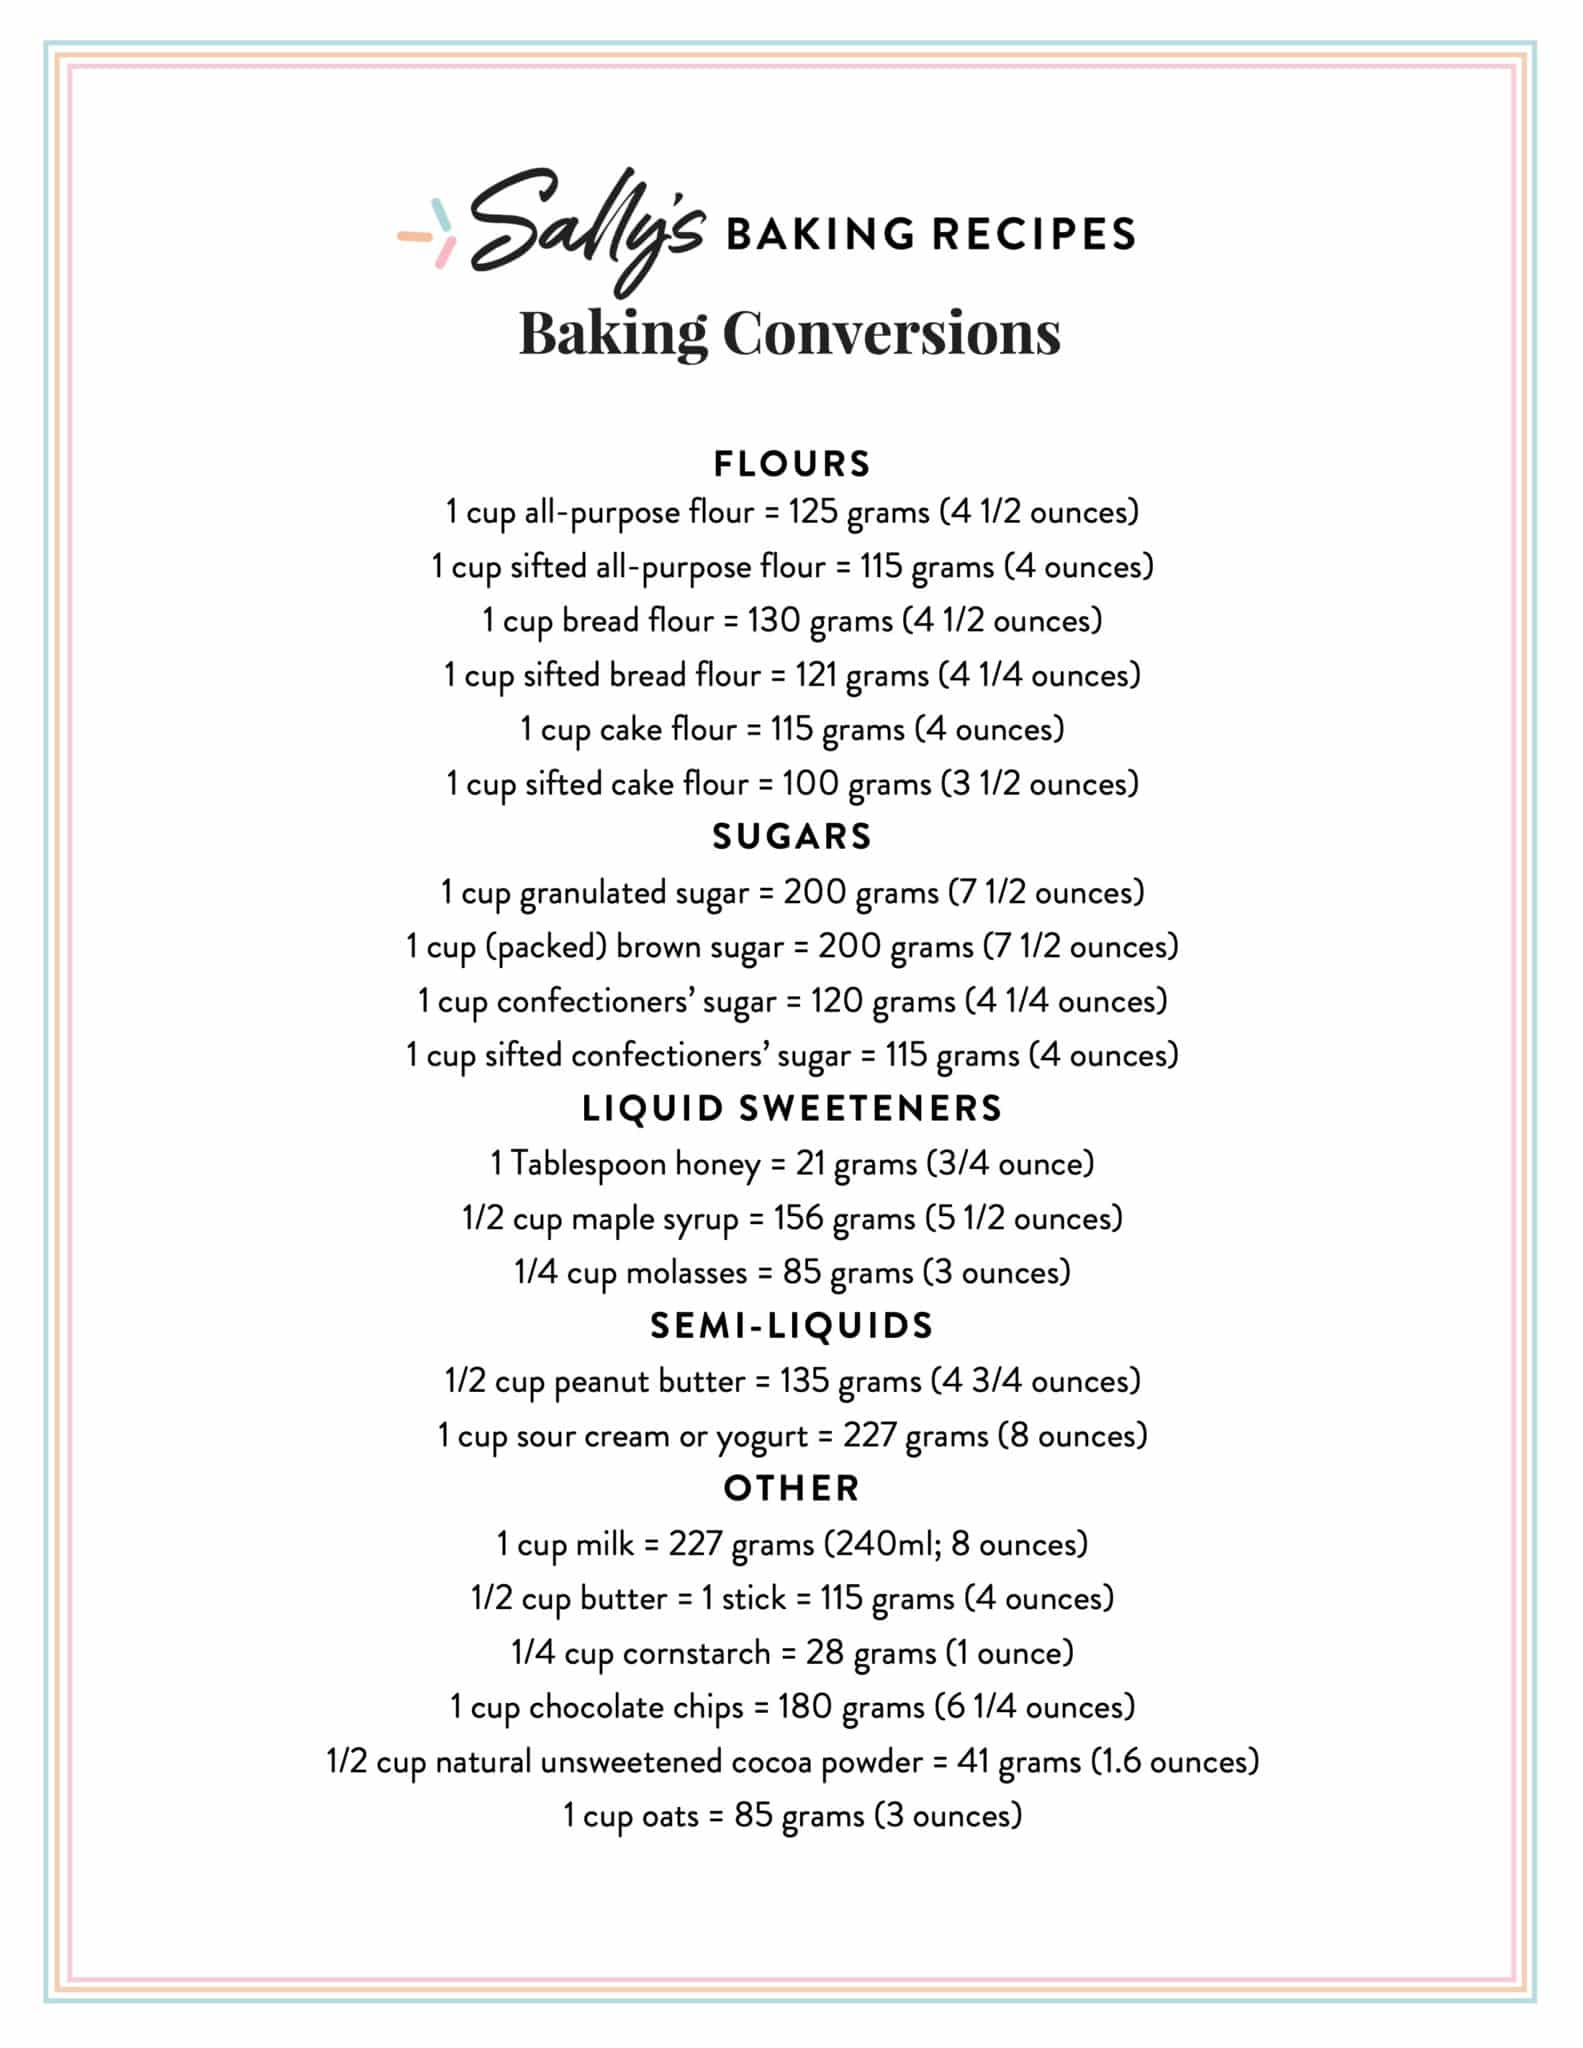 baking conversions list of ingredients and their volume + metric weights.